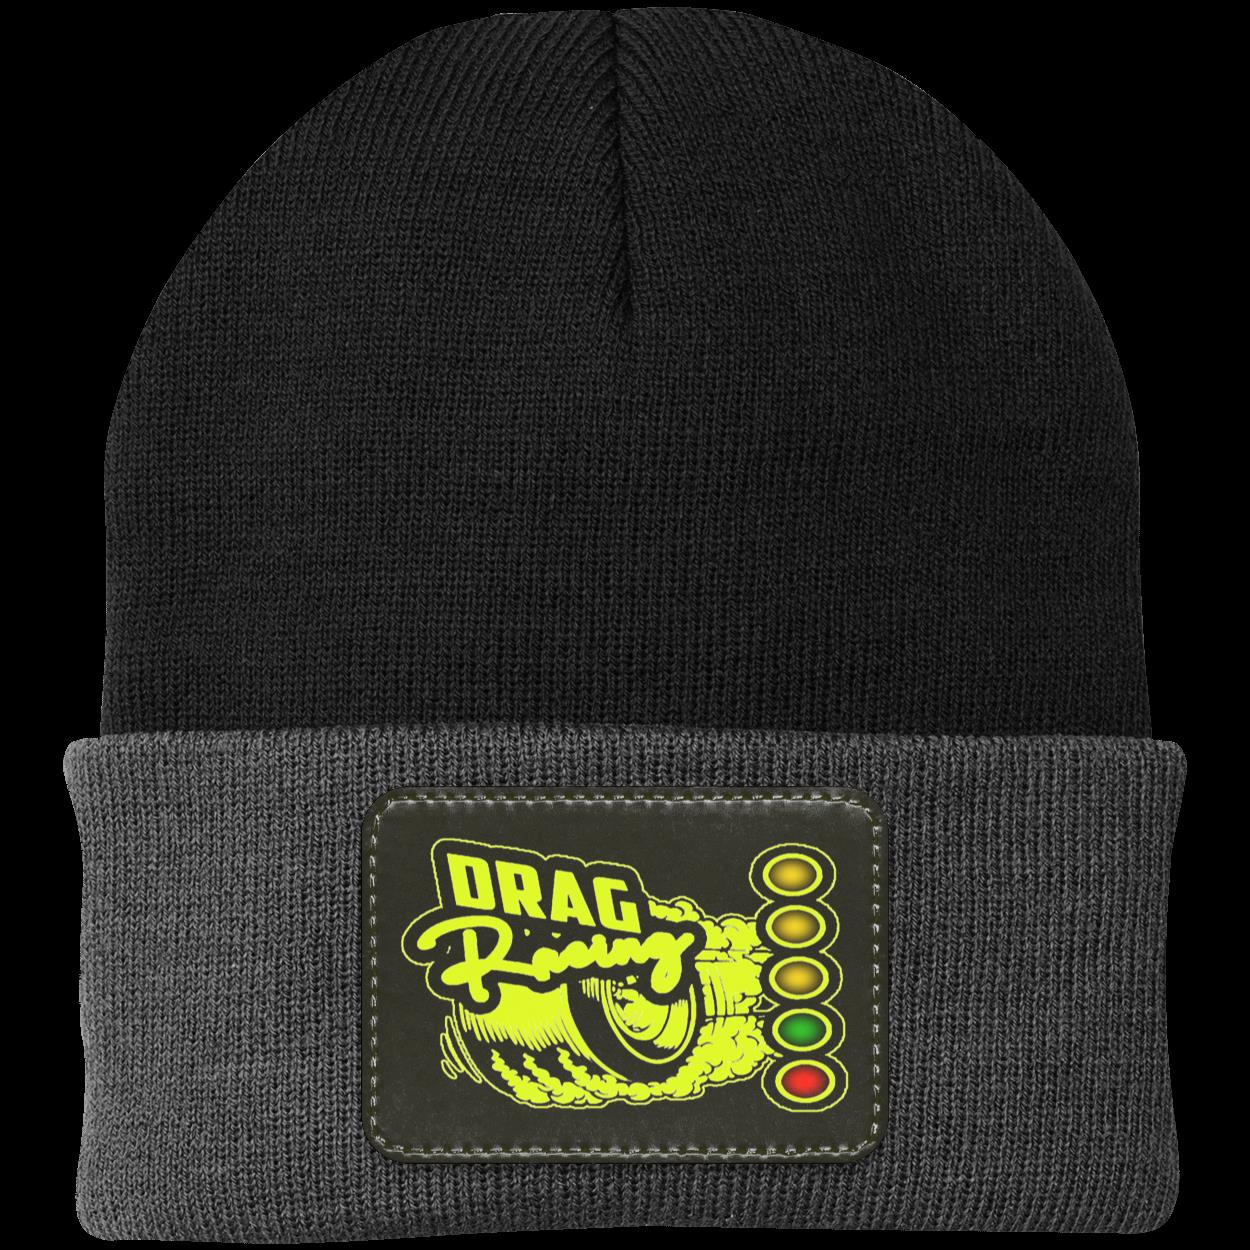 Drag Racing Patched Knit Cap V9